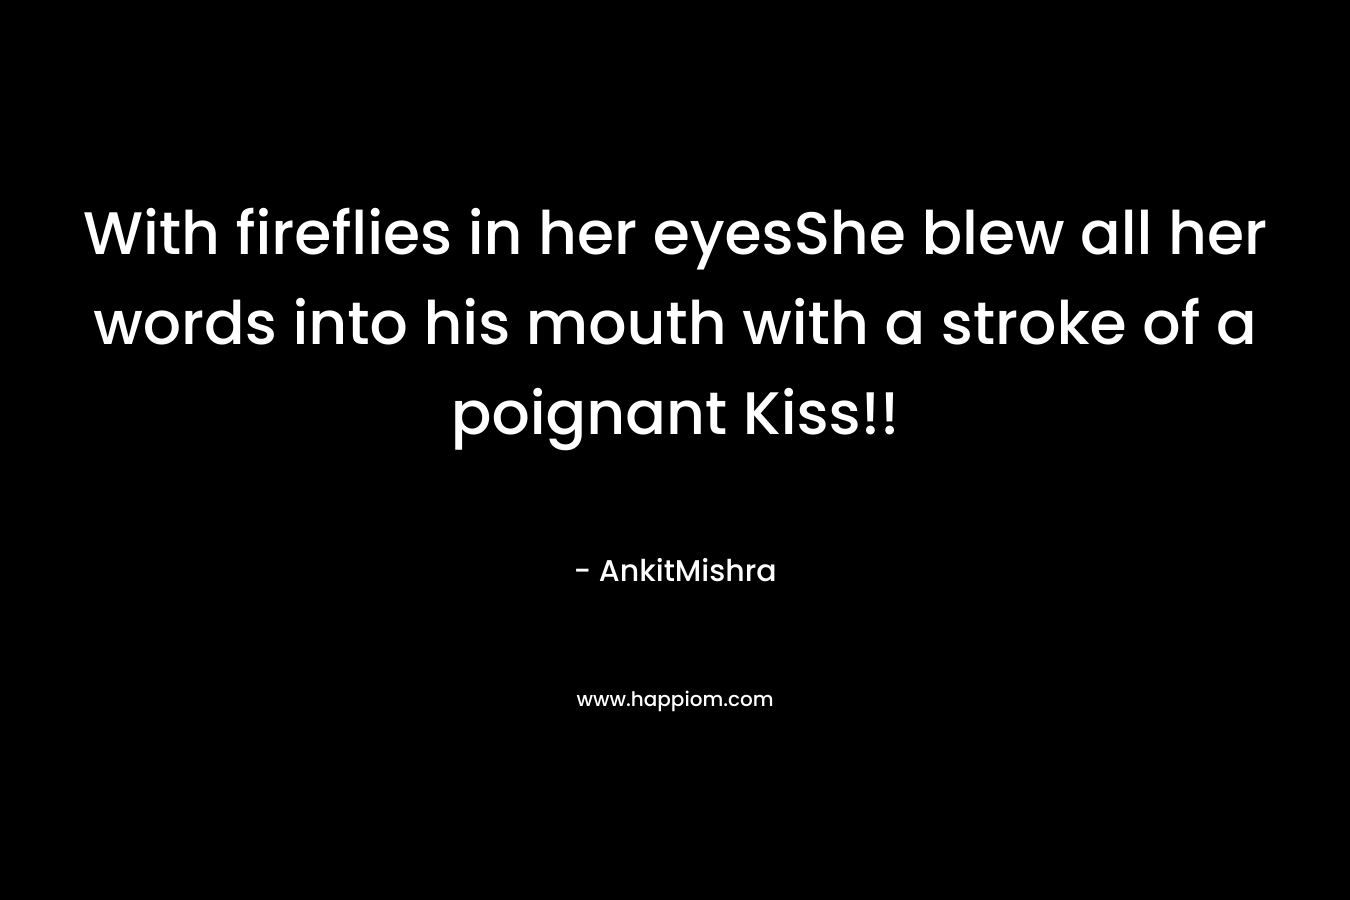 With fireflies in her eyesShe blew all her words into his mouth with a stroke of a poignant Kiss!!